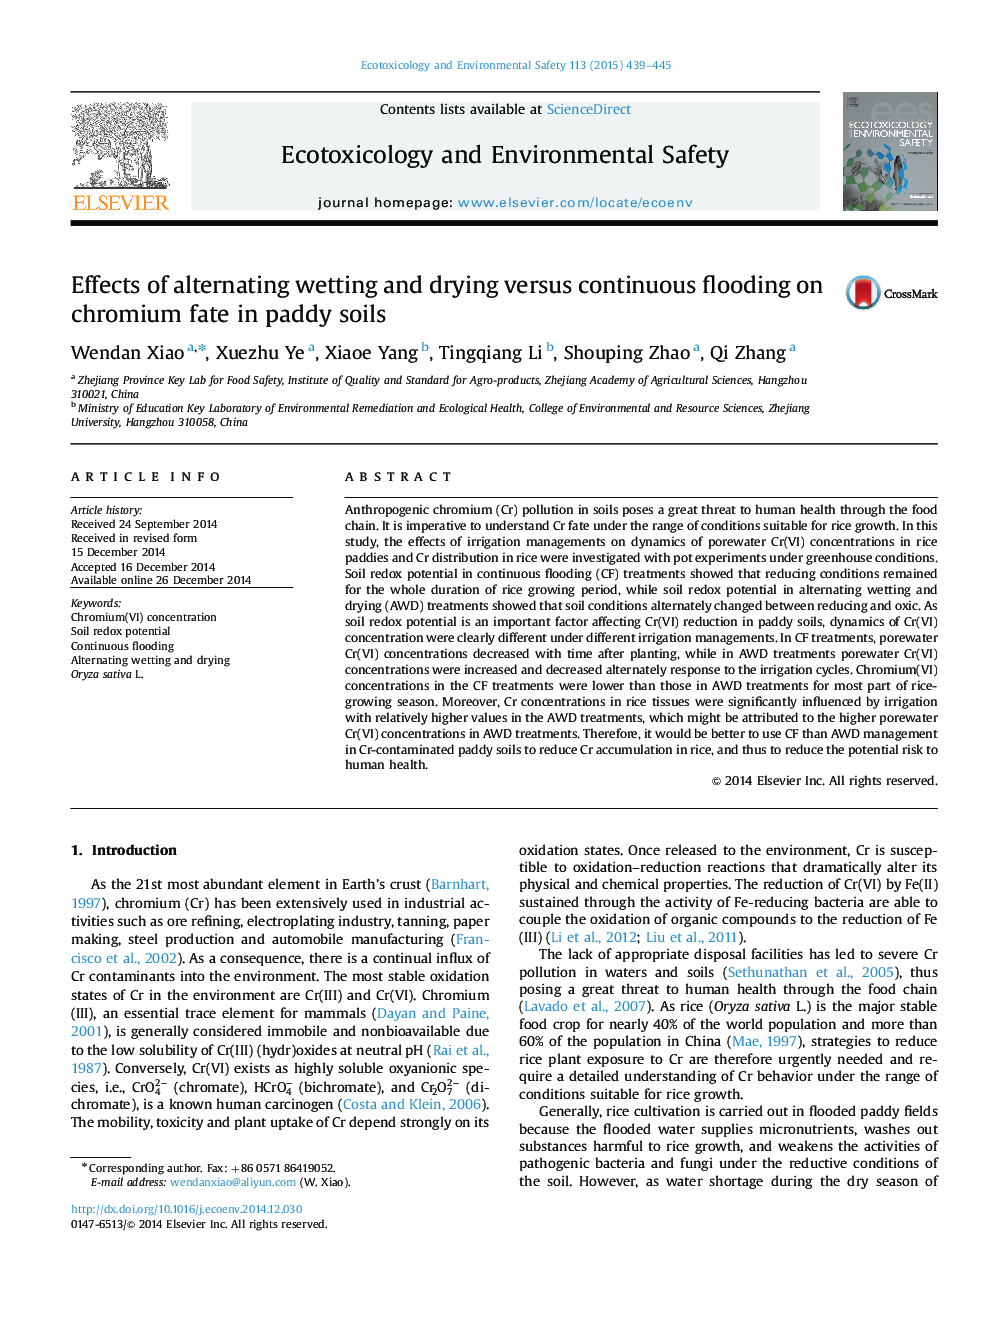 Effects of alternating wetting and drying versus continuous flooding on chromium fate in paddy soils